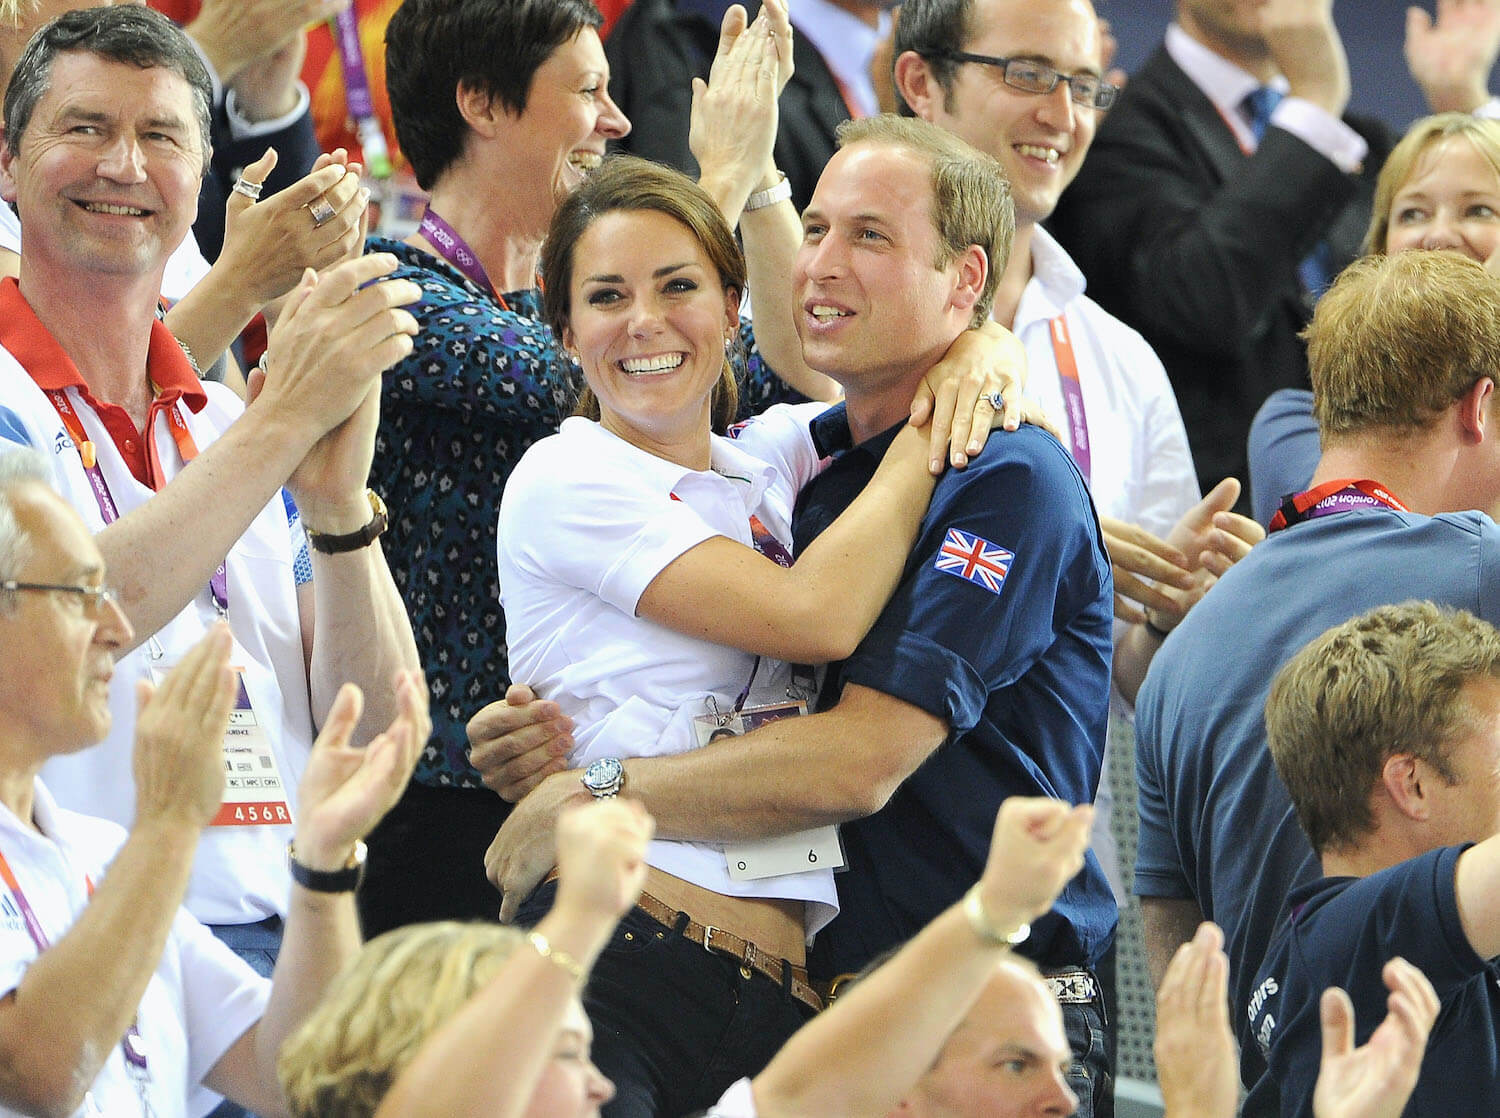 Prince William and Kate Middleton celebrate with a hug at the 2012 Olympics